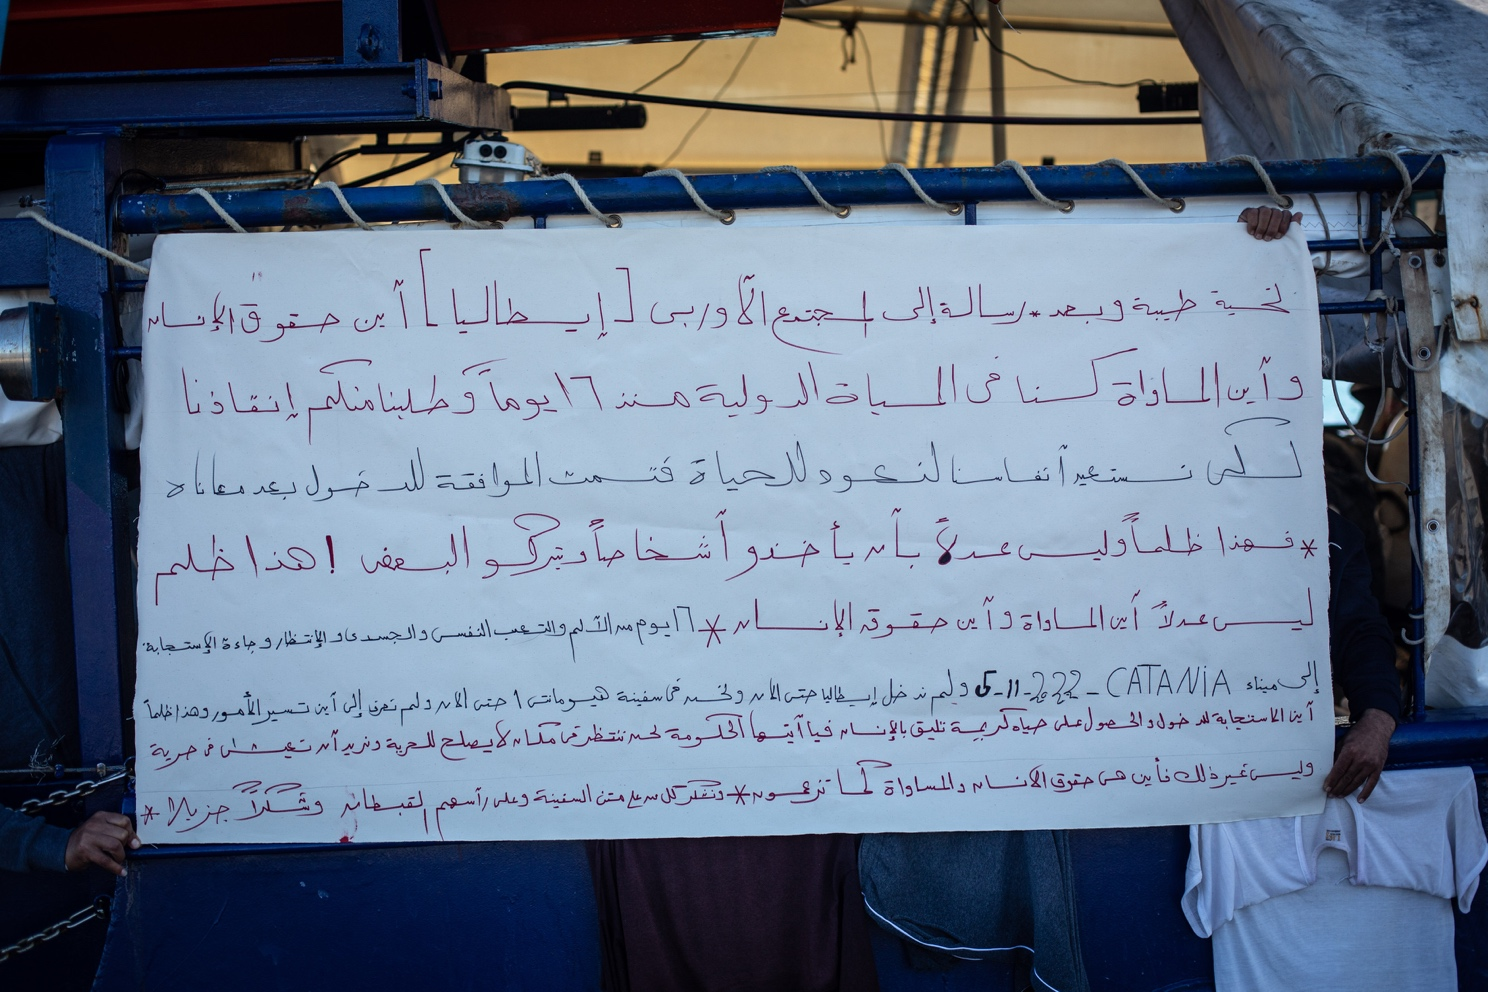 A protest sign in Arabic